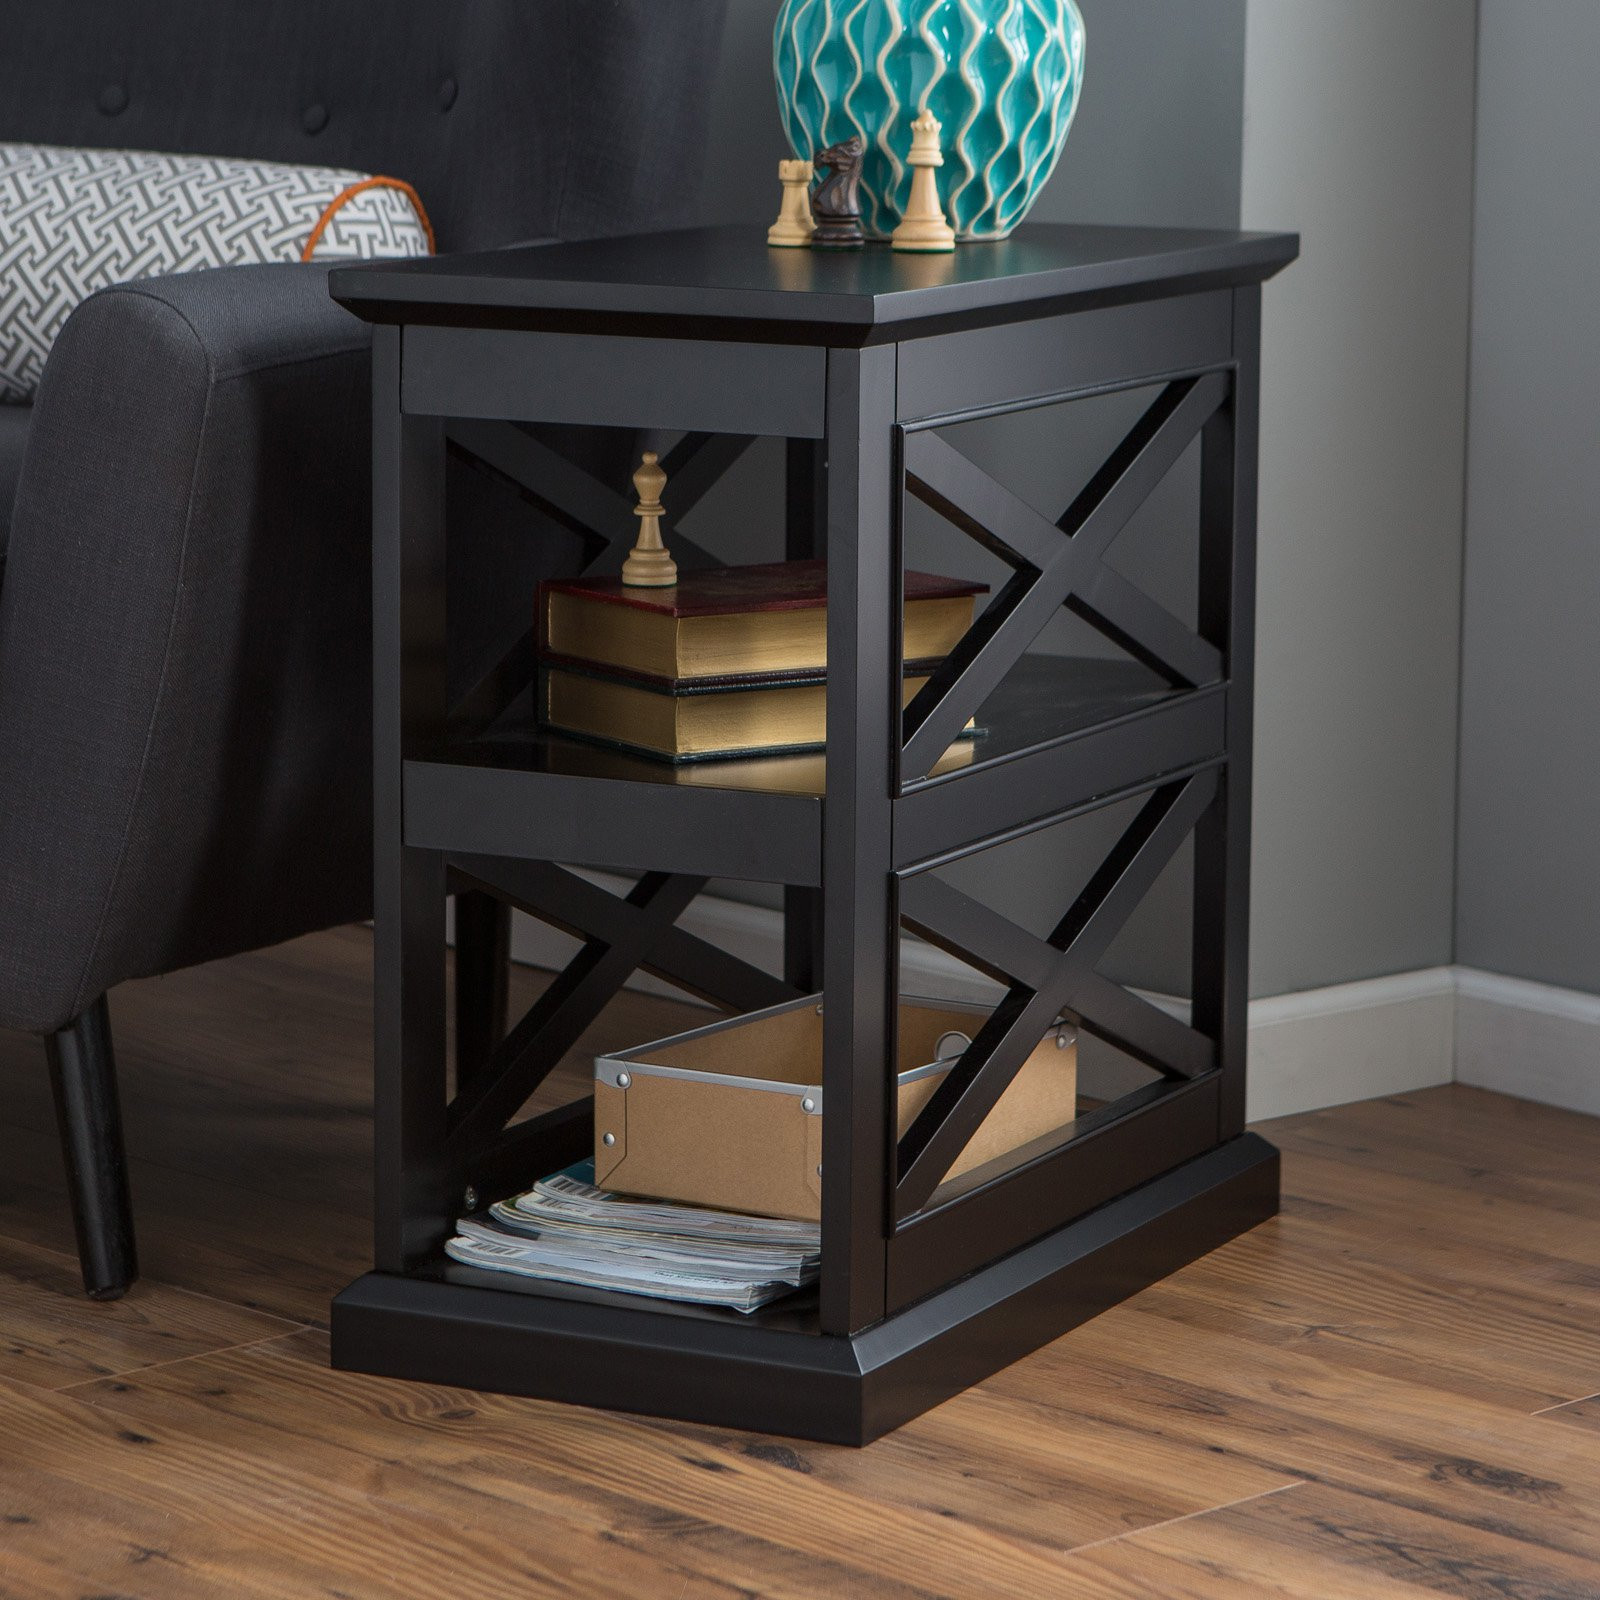 Side Table For Living Room
 The Best Black End Tables for Living Room 2018